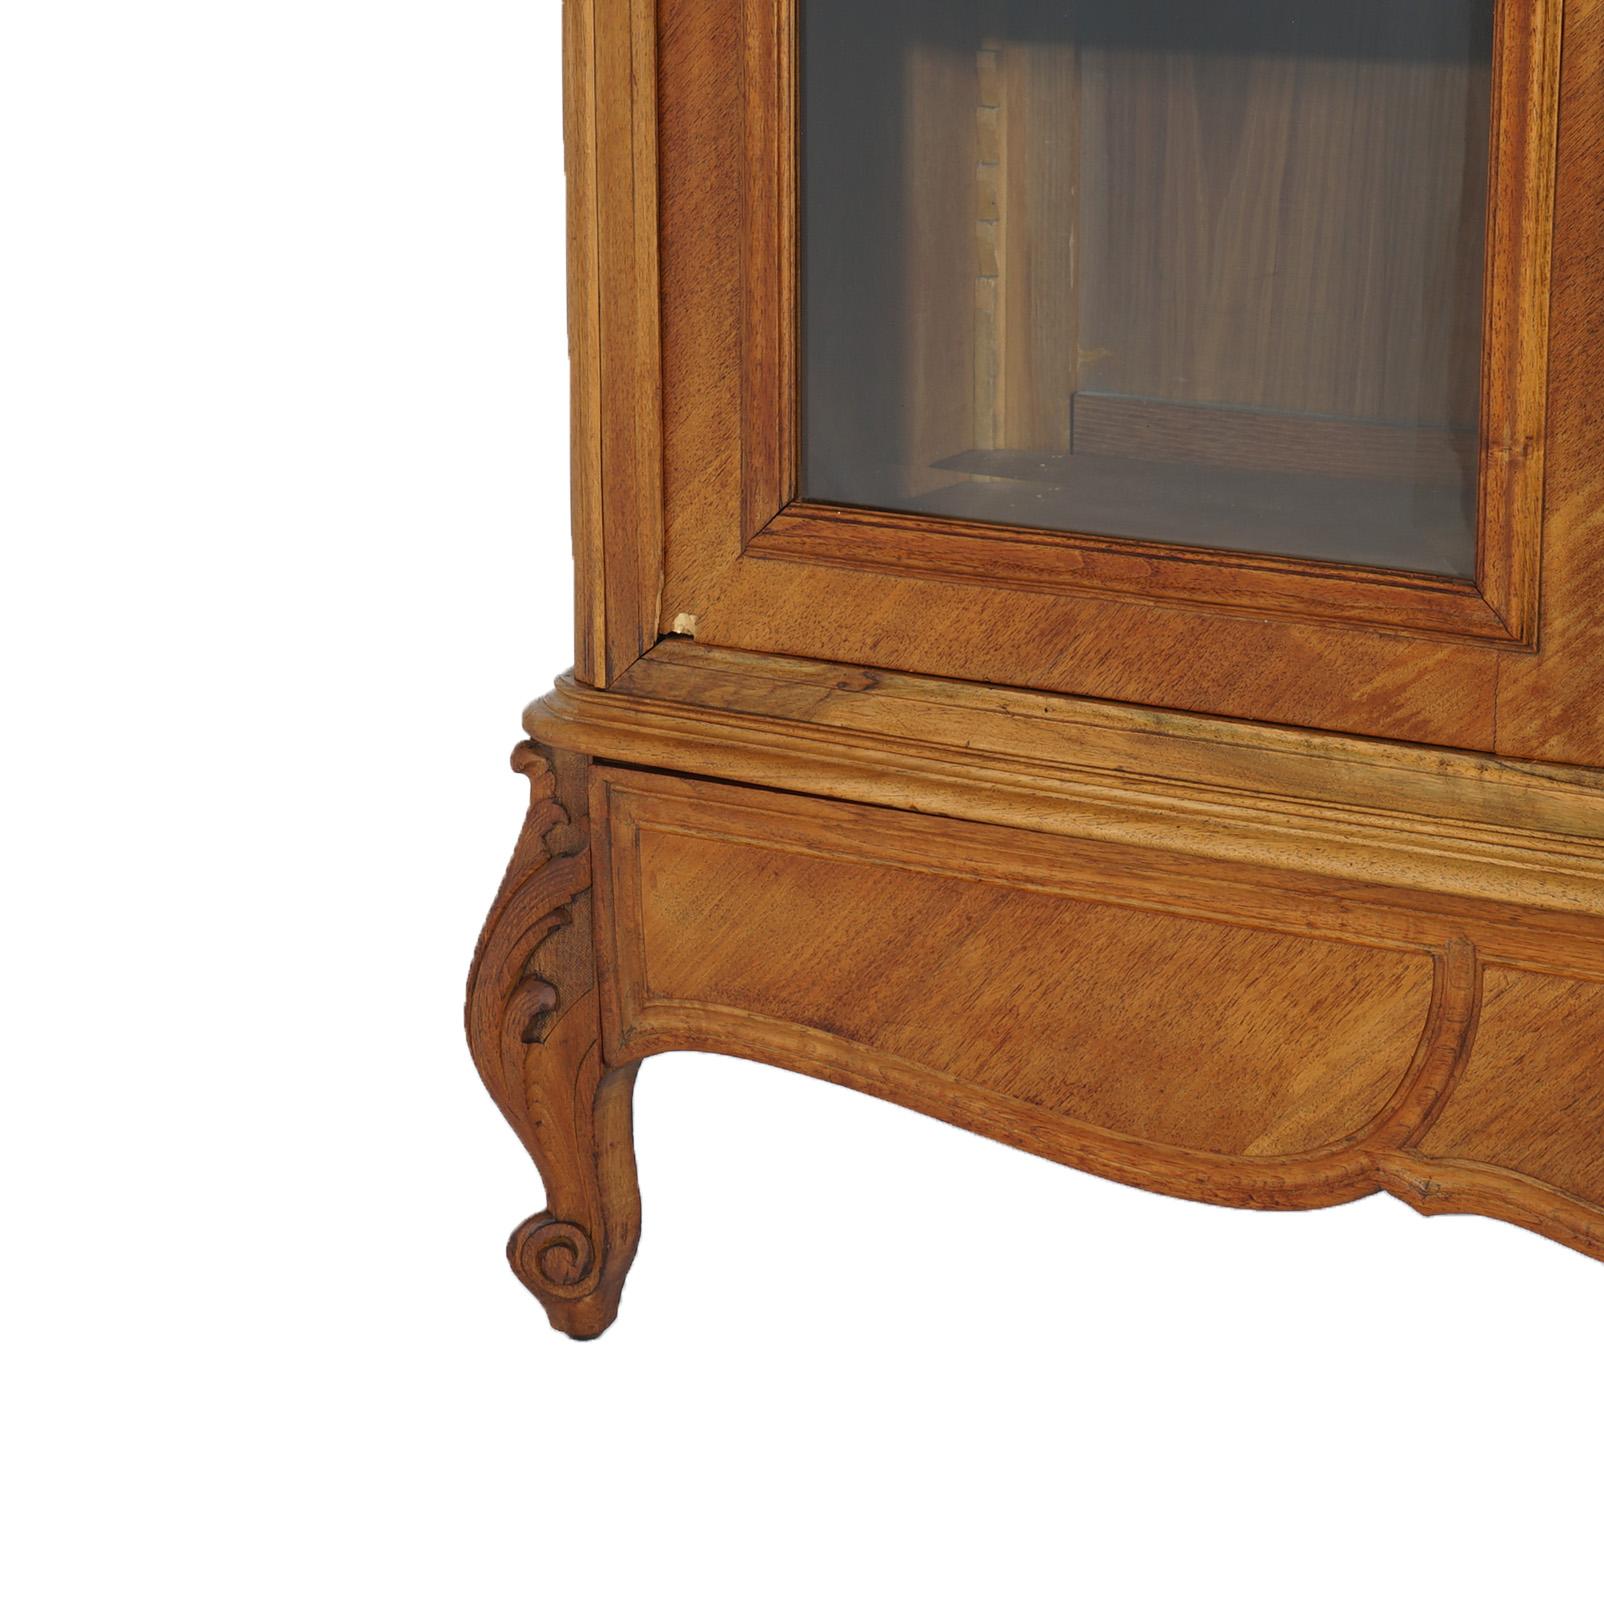 ***Ask About Reduced In-House Delivery Rates - Reliable Professional Service & Fully Insured***
An antique French Louis XIV style curio Wardrobe offers kingwood construction with arched crest over case with double glass doors opening to shelved